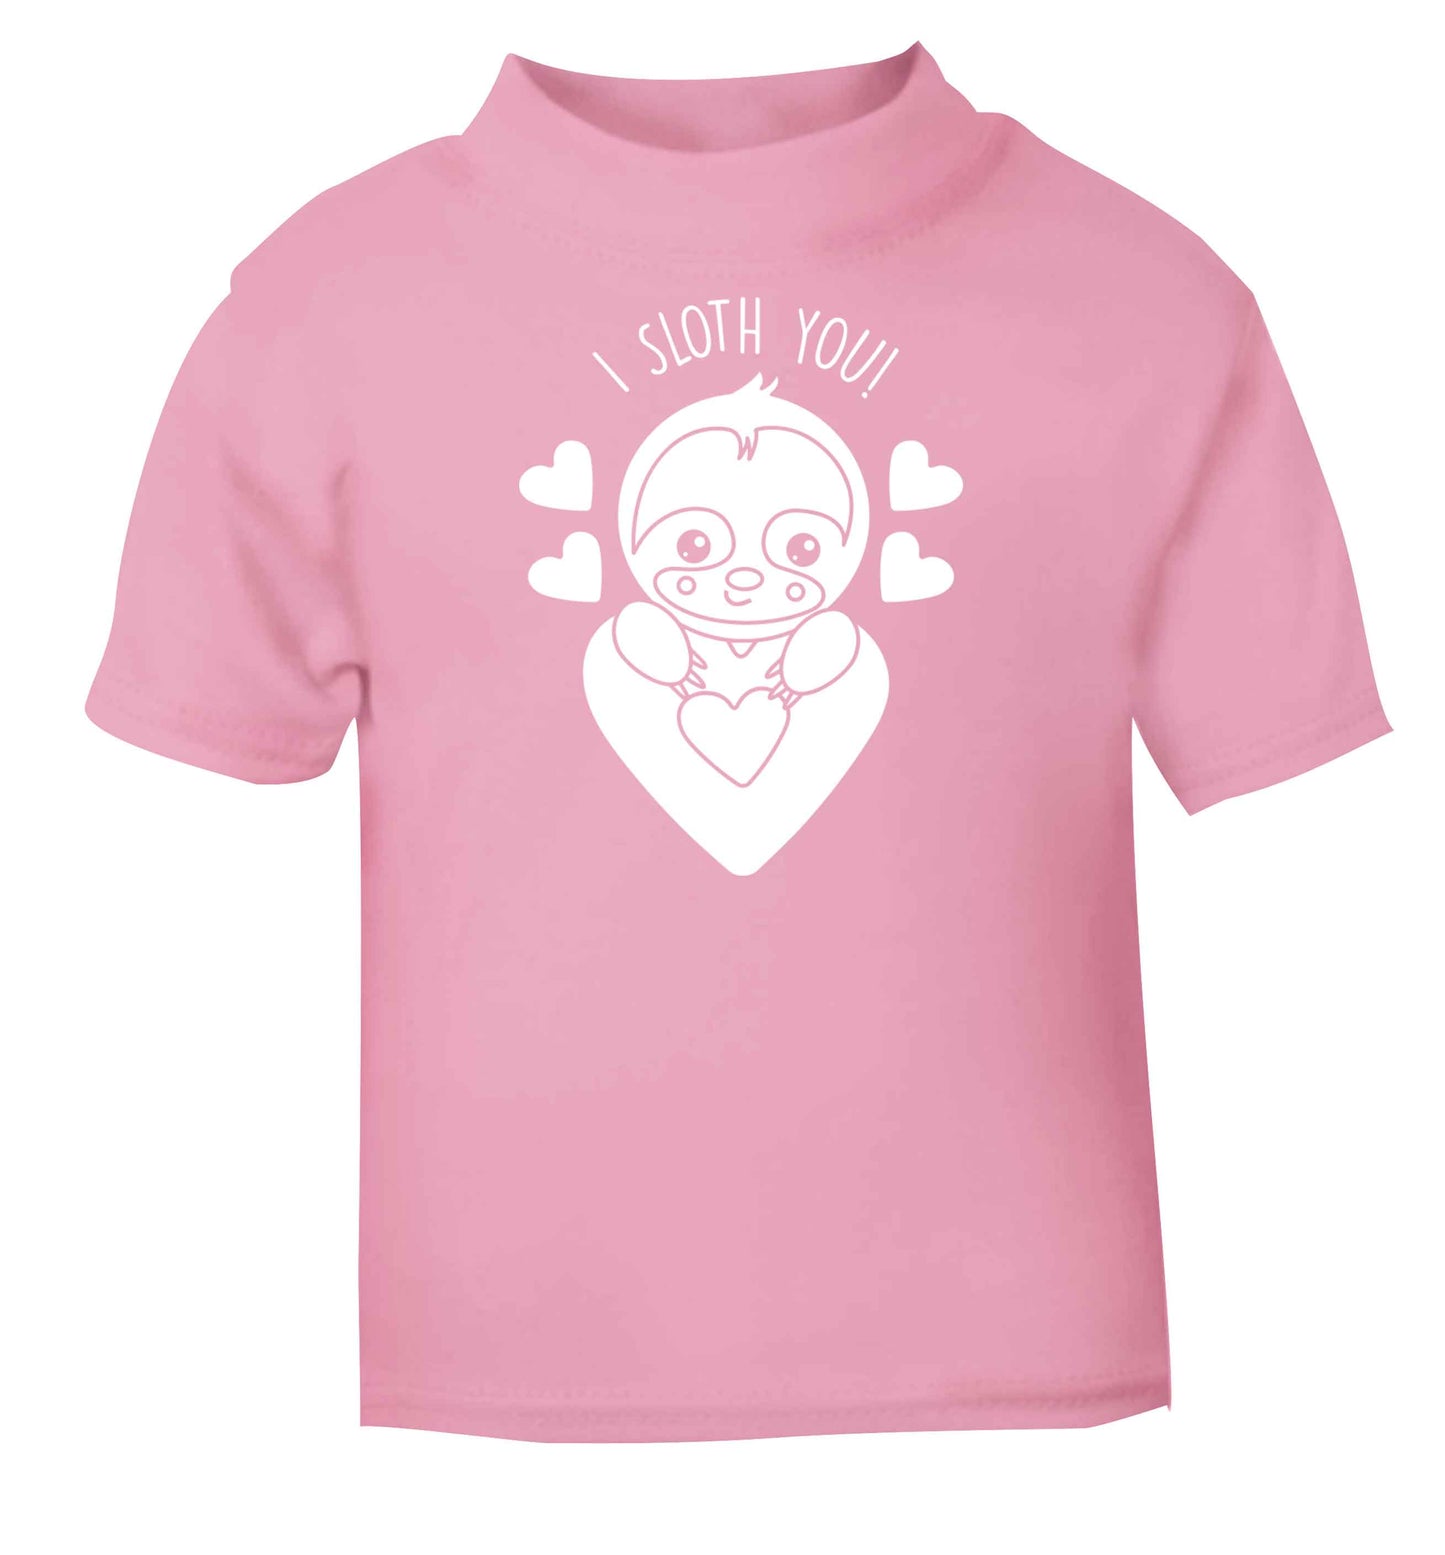 I sloth you light pink baby toddler Tshirt 2 Years